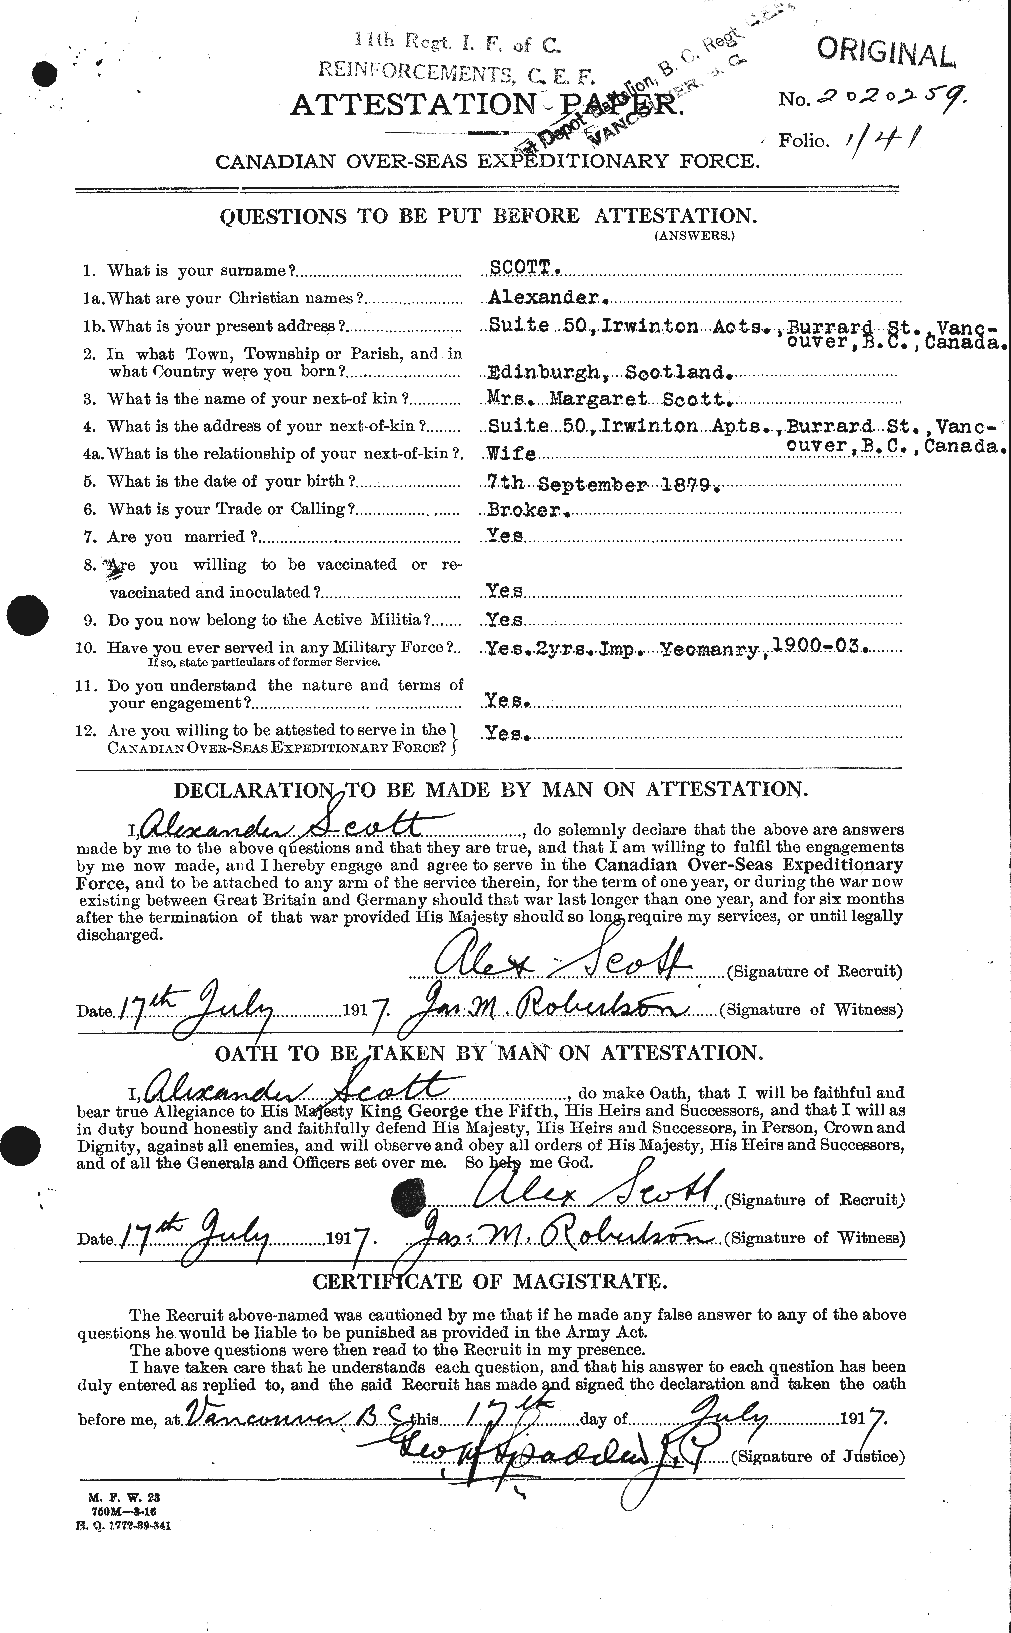 Personnel Records of the First World War - CEF 086834a